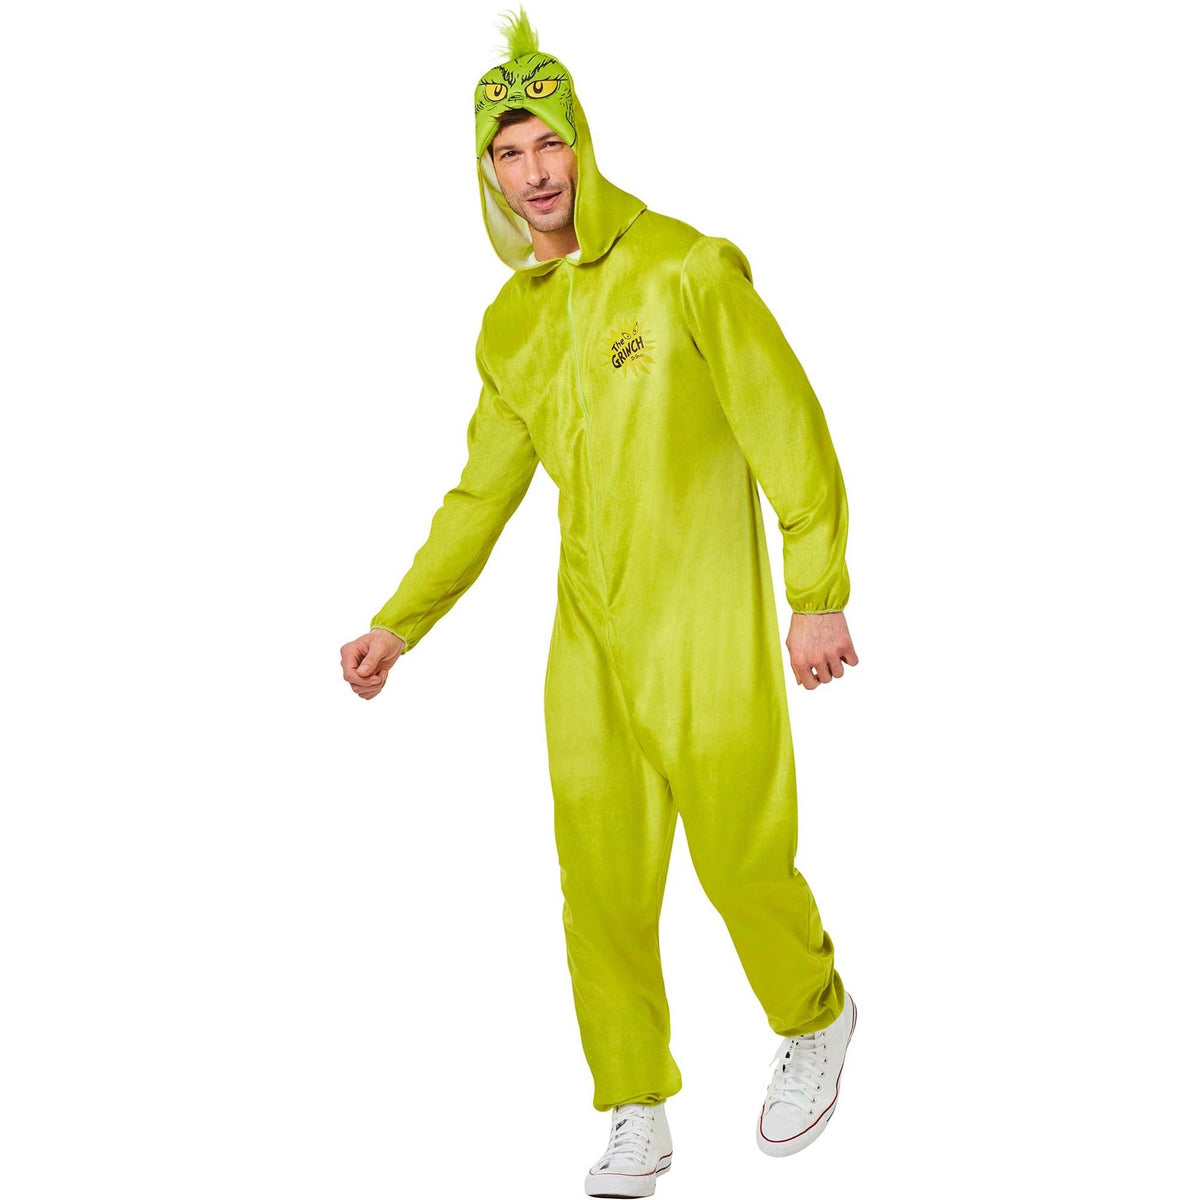 IN SPIRIT DESIGNS Christmas The Grinch Costume for Adults, Green Hooded Jumpsuit